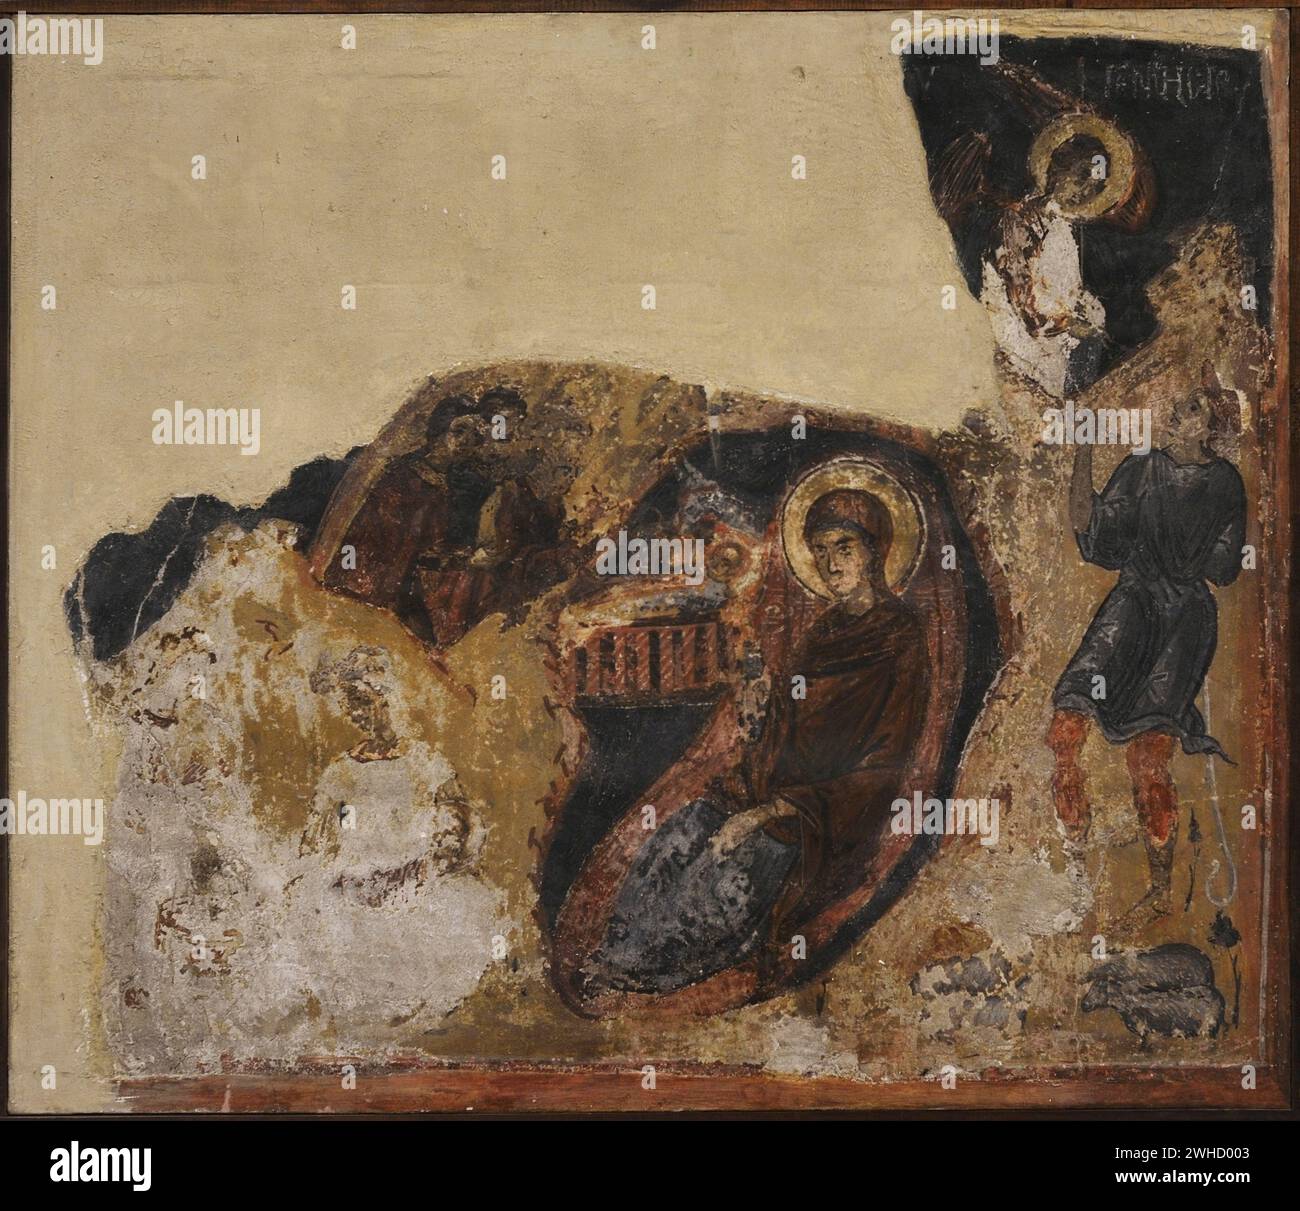 The Nativity of Christ. Mural painting from the Church of St. George Mali, built in the 17th century on the southern shore of the ancient Nesebur, demolished in 1946. Mesambria (Nesebur), Burgas region, Bulgaria. National Archaeological Museum. Sofia. Bulgaria. Stock Photo